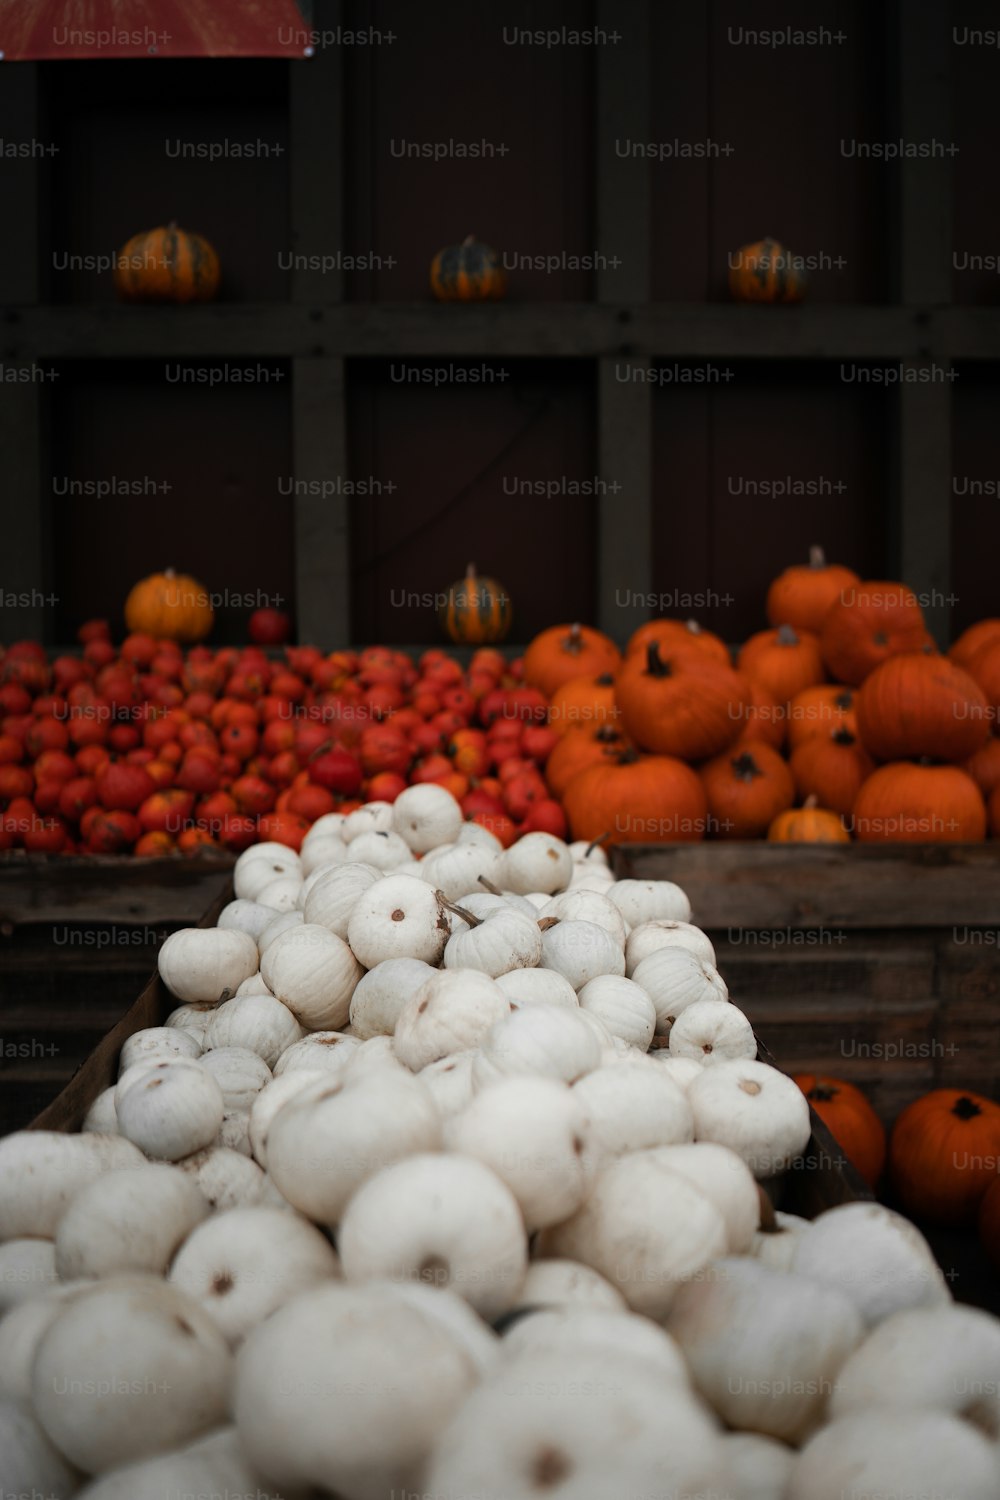 a pile of white mushrooms sitting next to a pile of orange pumpkins